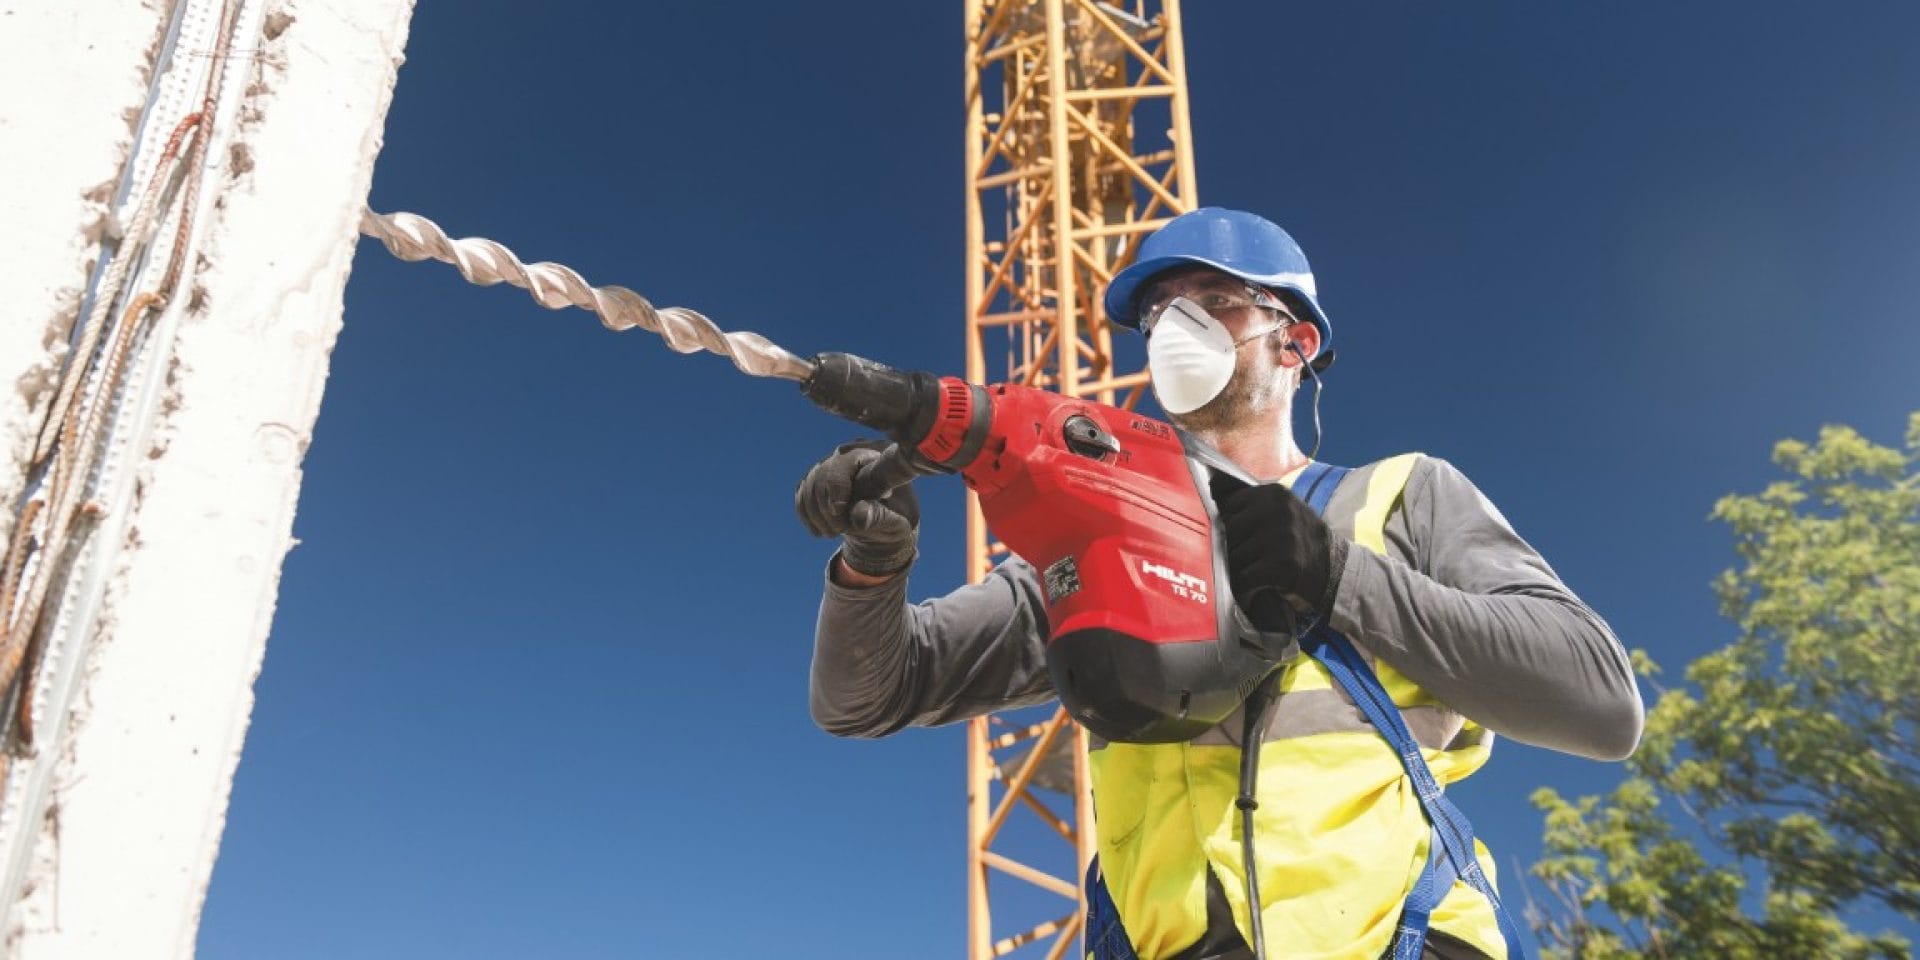 Our Hilti Drilling & Demolition Safety  Training gives you an overview of the  risks caused by using drilling and  demolition devices, and how to prevent  them.